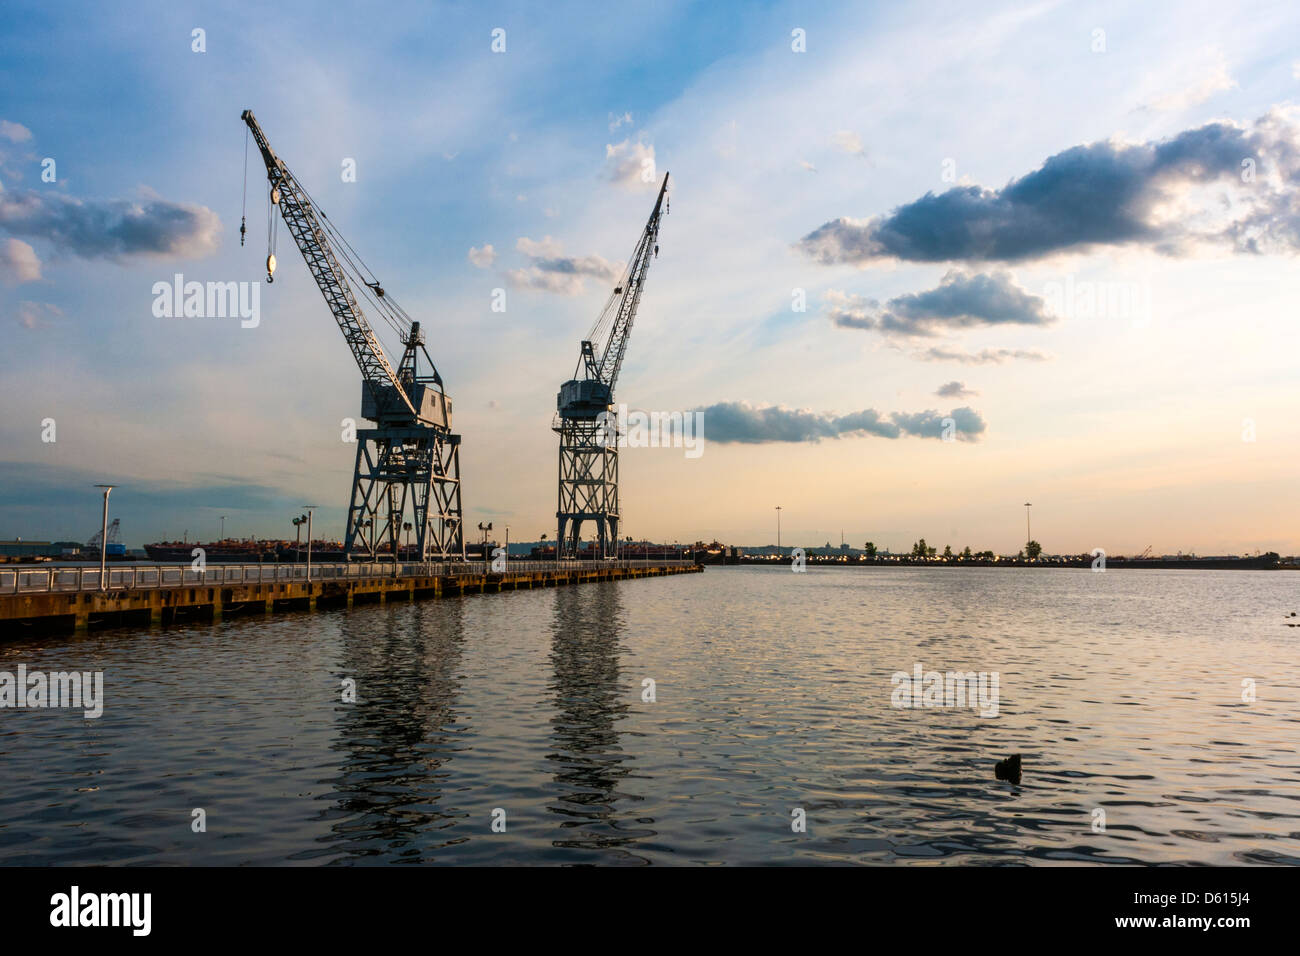 Ikea on the waterfront in Red Hook, Brooklyn Stock Photo - Alamy